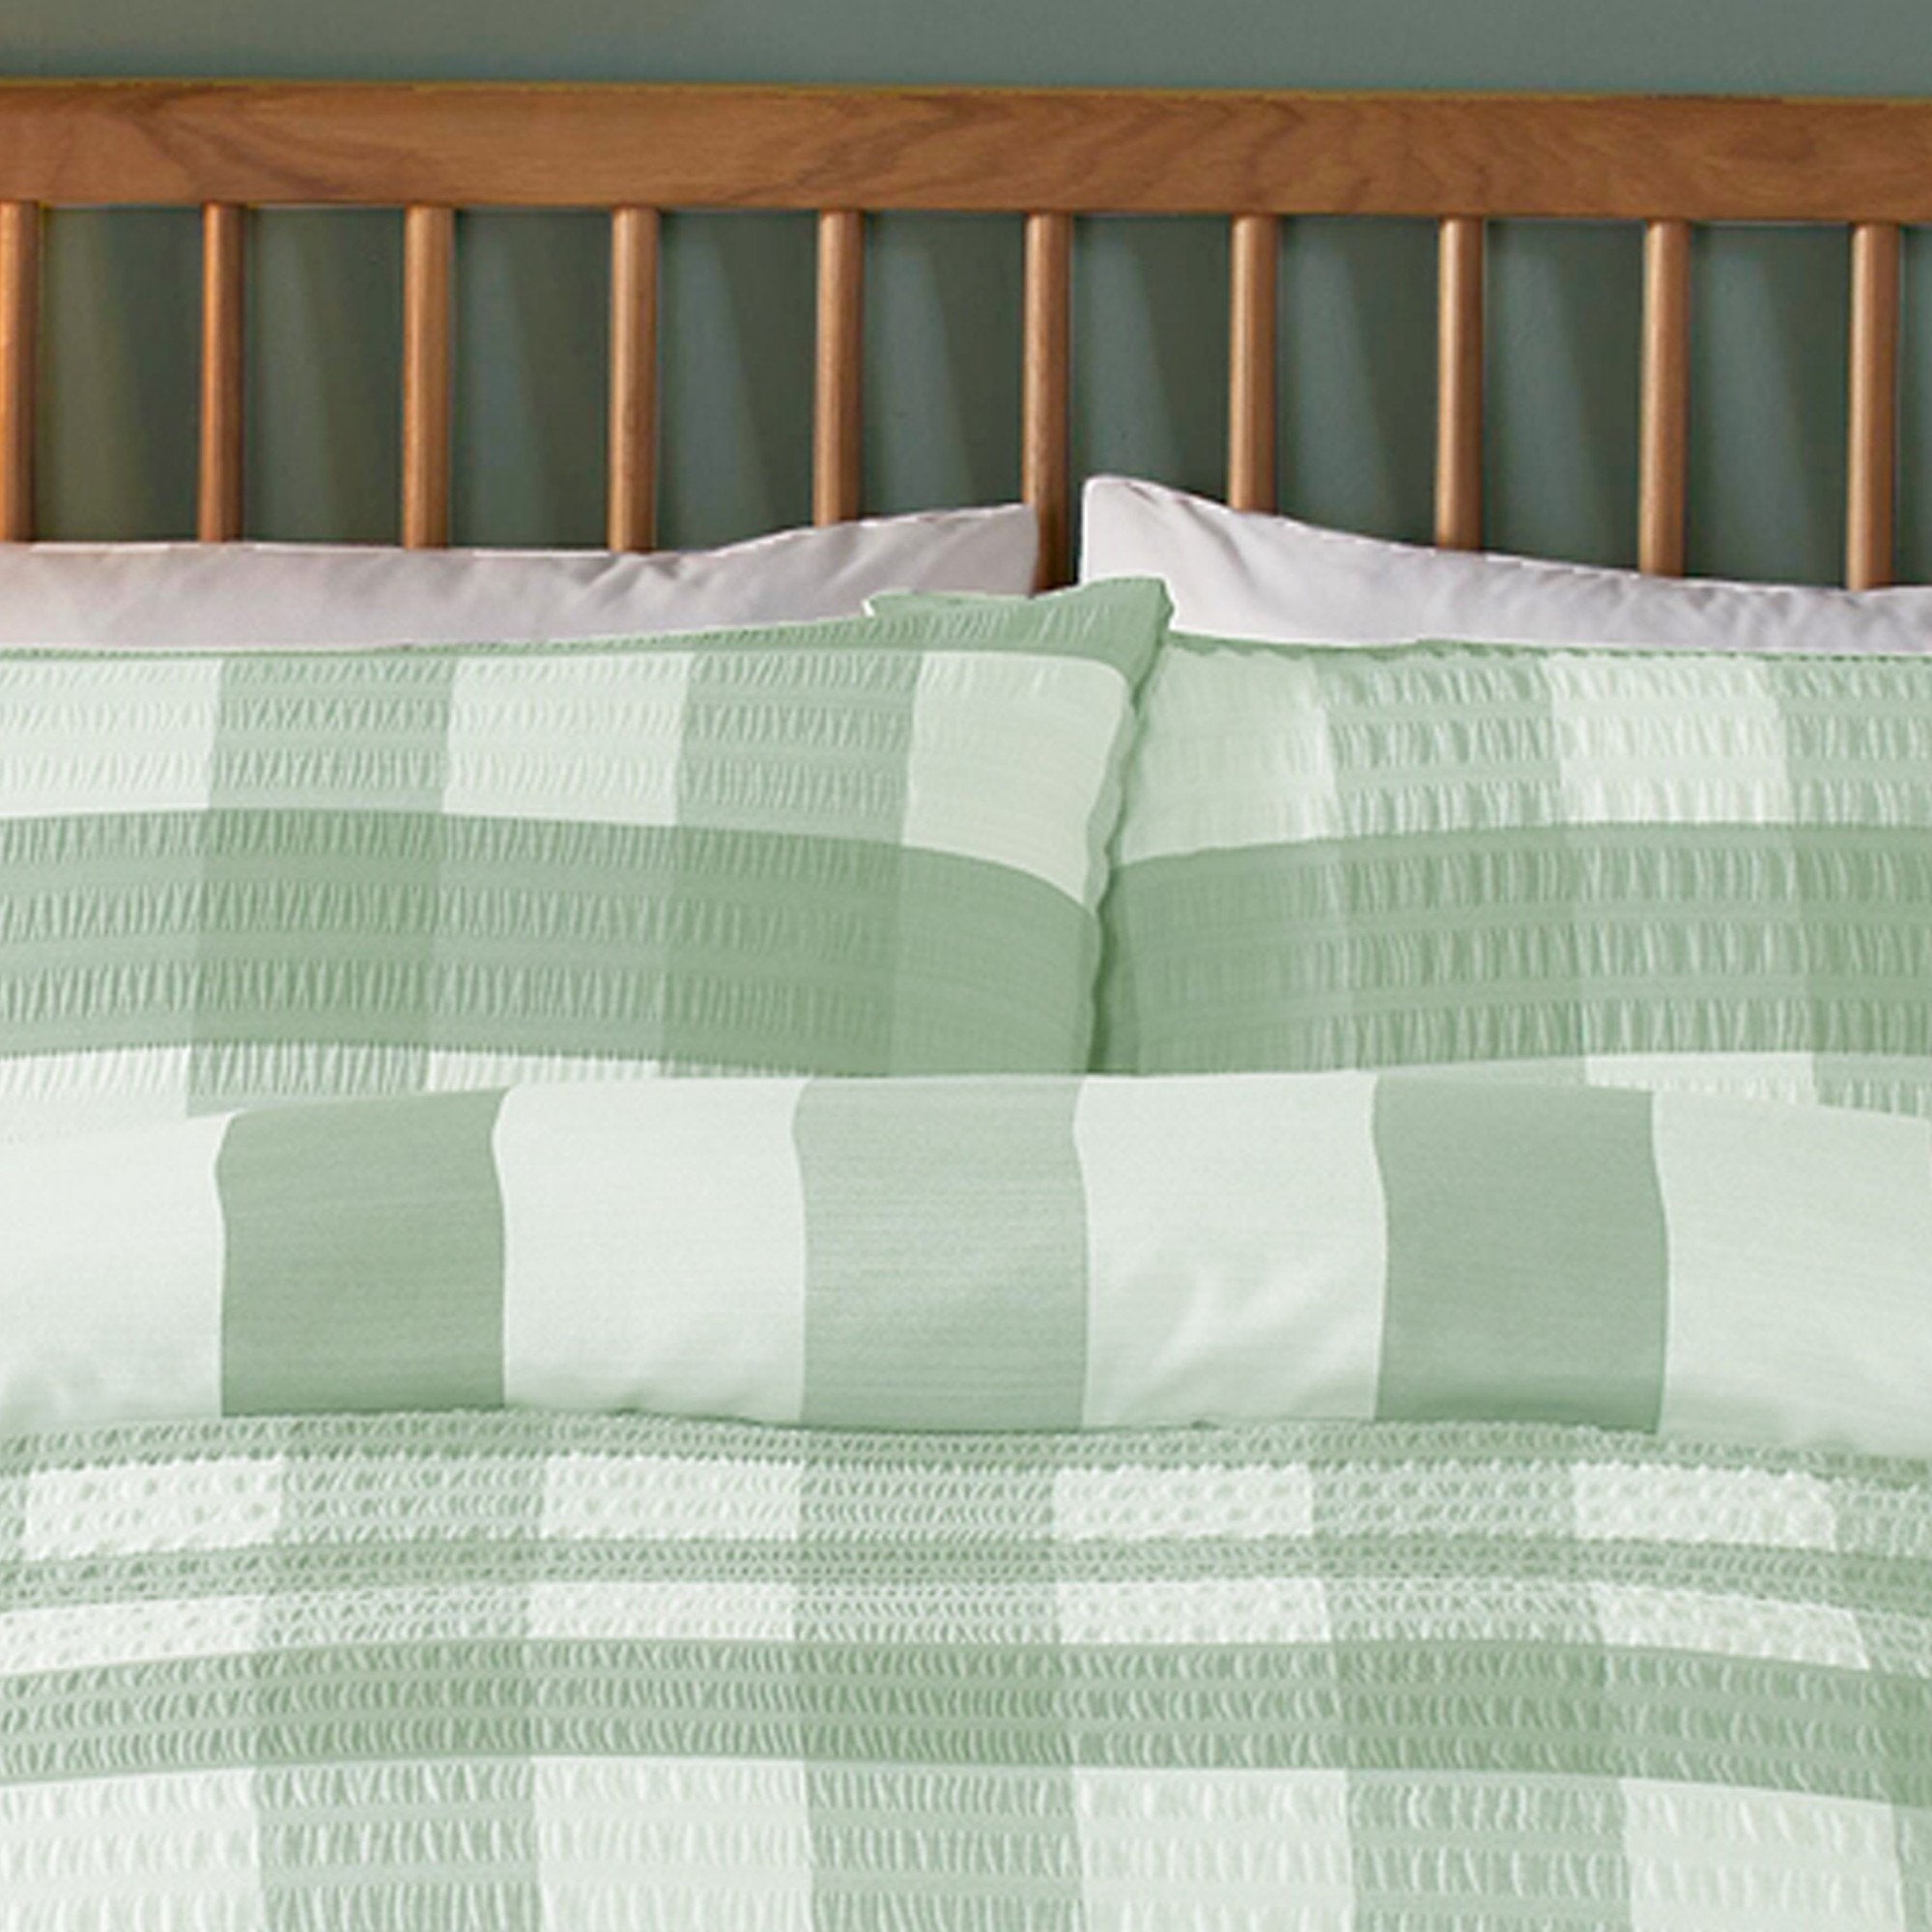 Duvet Cover Set Seersucker Gingham by Fusion in Green